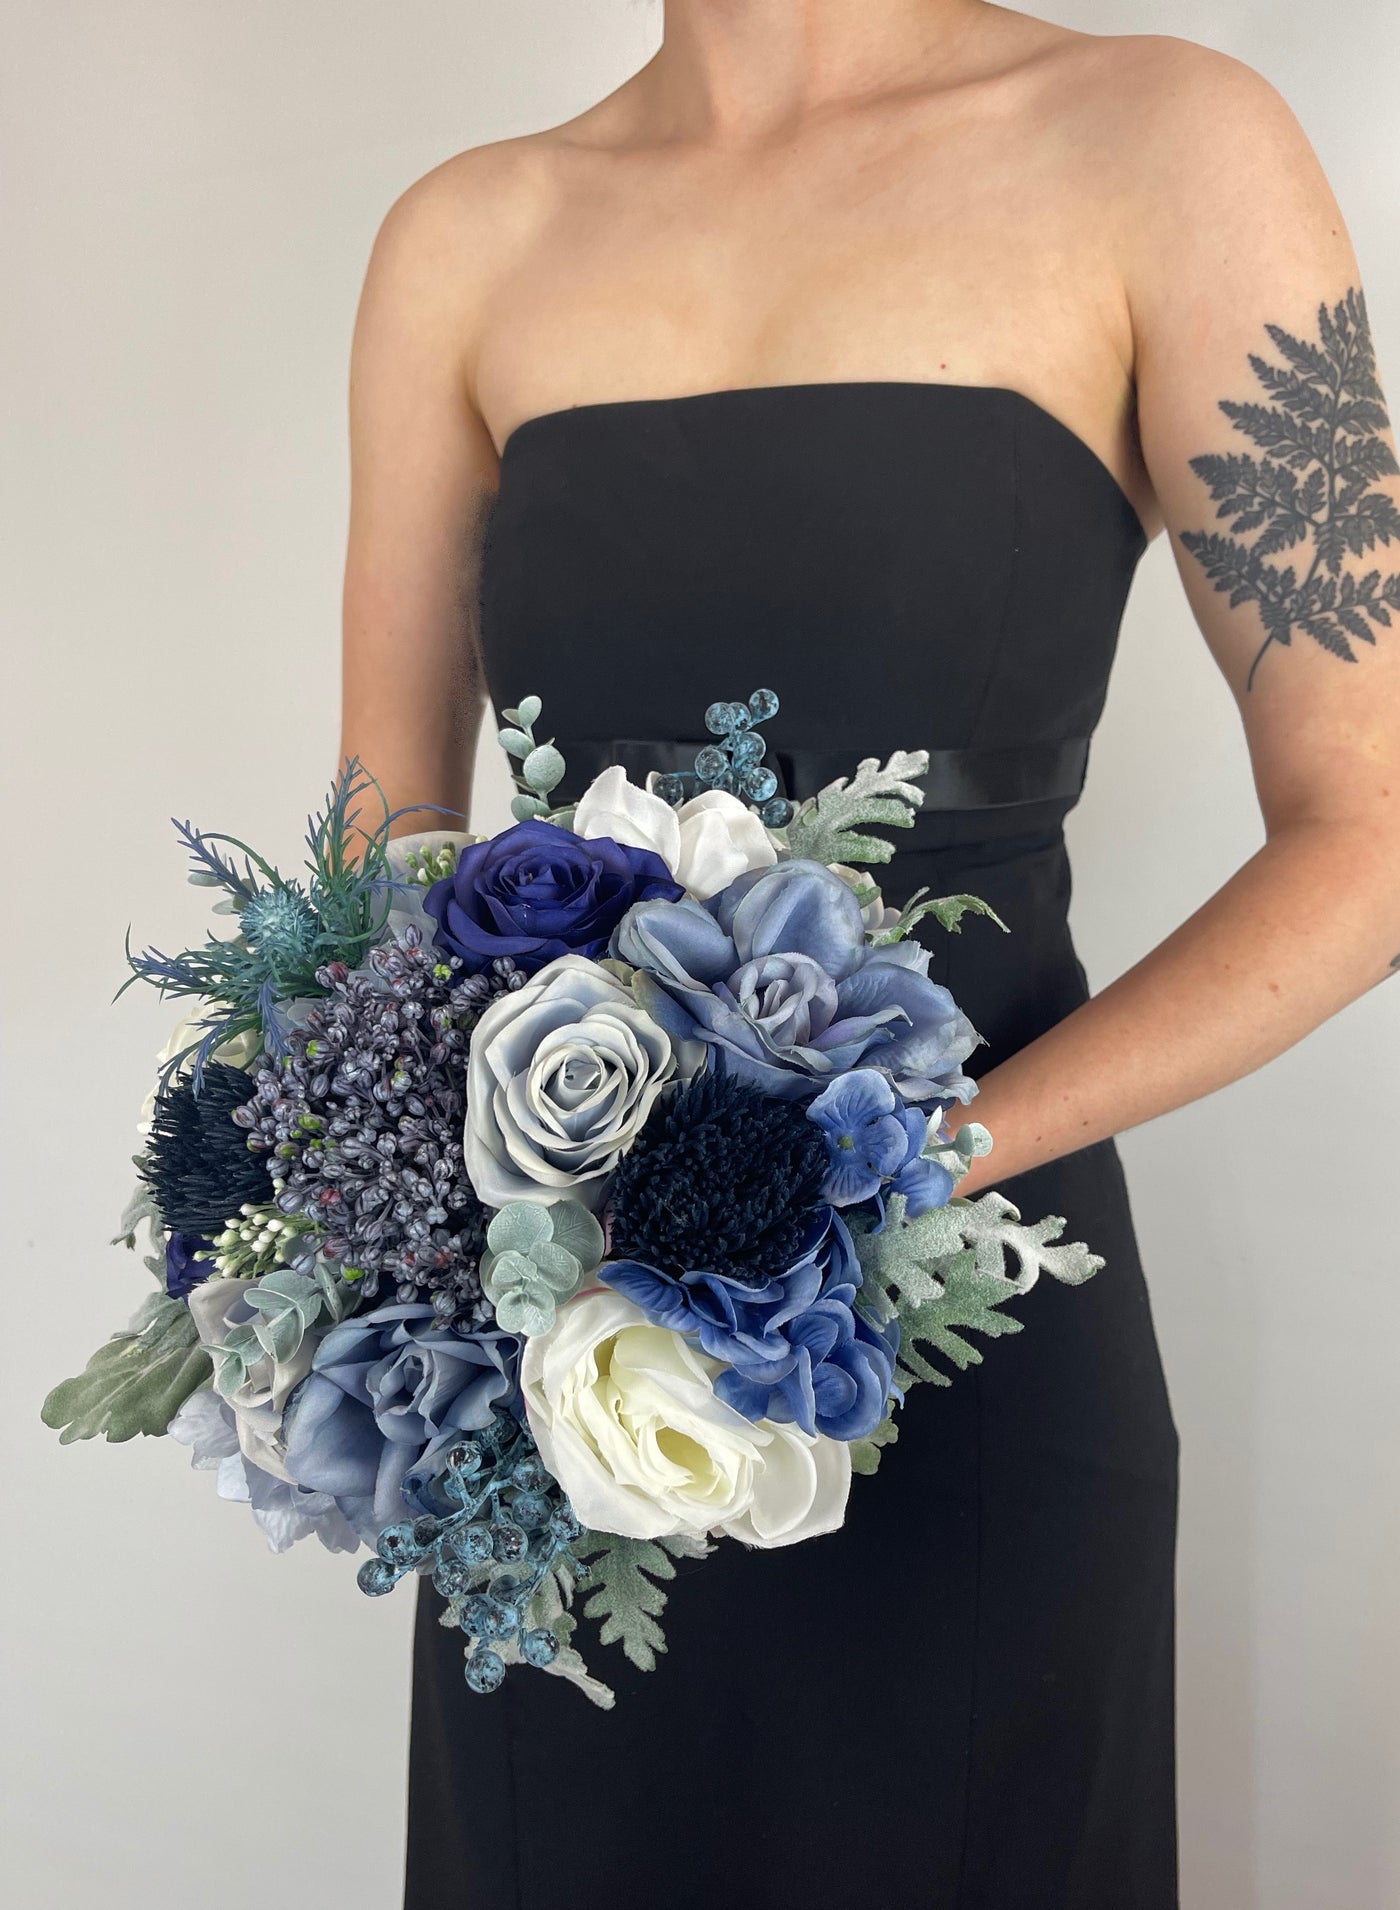 Blue bridesmaid bouquet being held by woman in black dress.